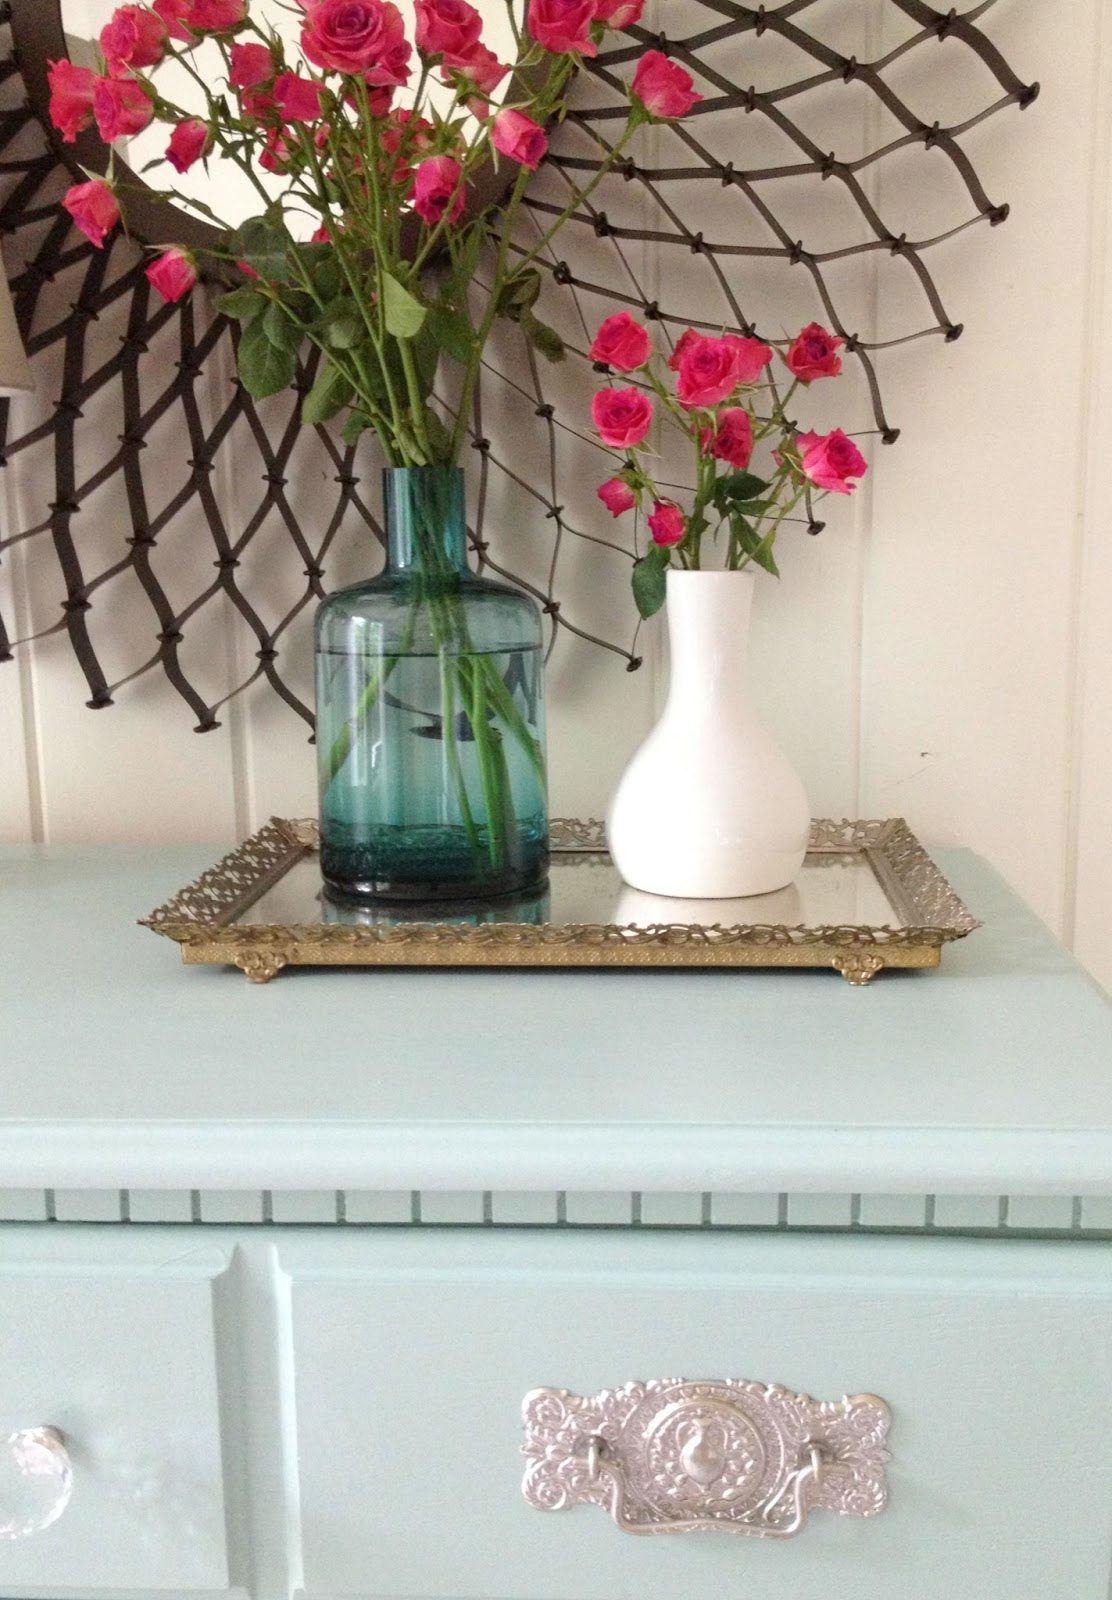 LiveLoveDIY: How To Paint Laminate Furniture in 3 Easy Steps!